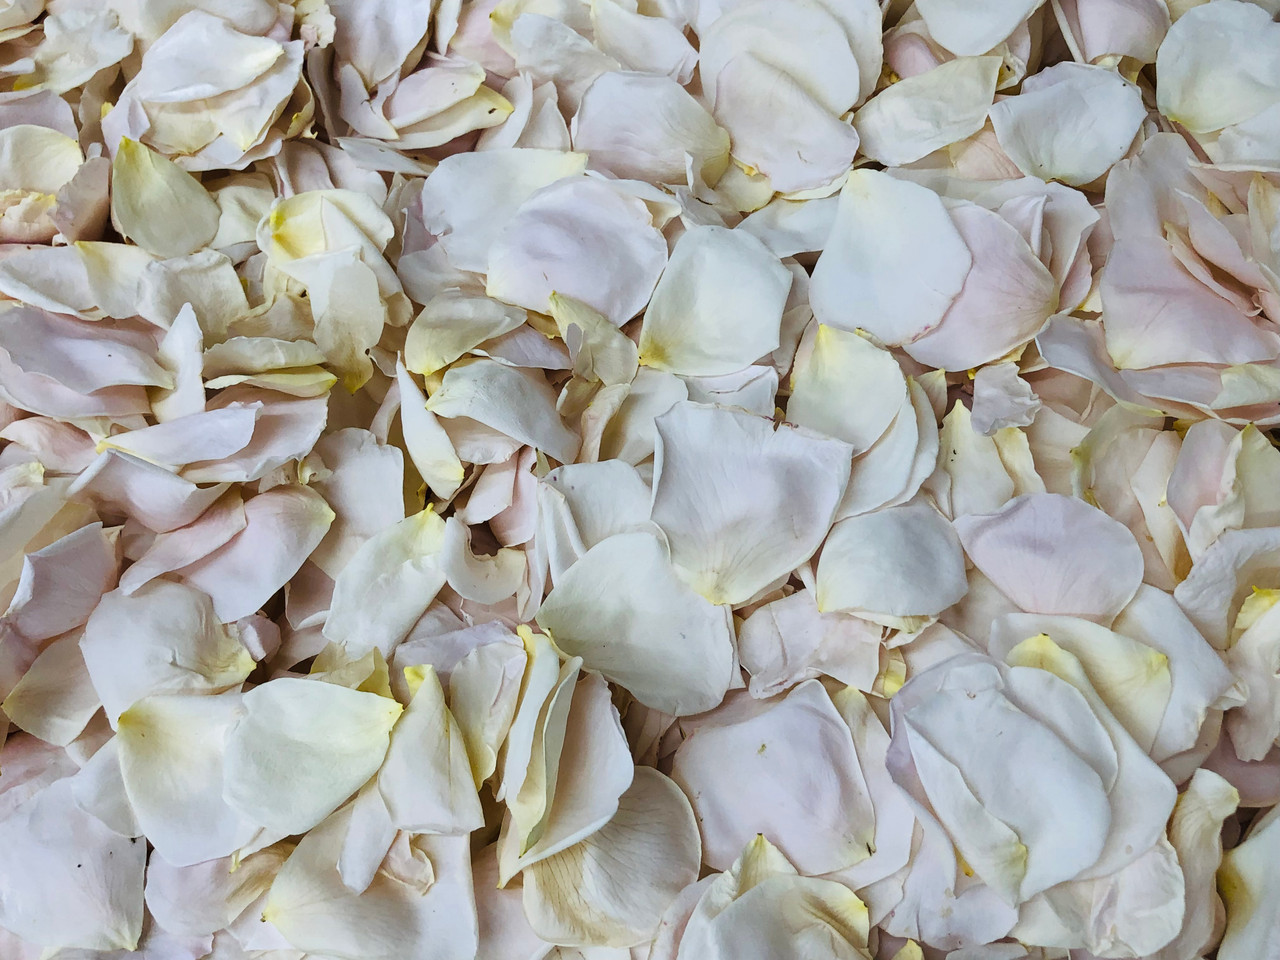 Falling In Love Rose Petals. 15 cups of Preserved Freeze-dried Real Rose  Petals. Wedding Rose Petals by Flyboy Naturals.